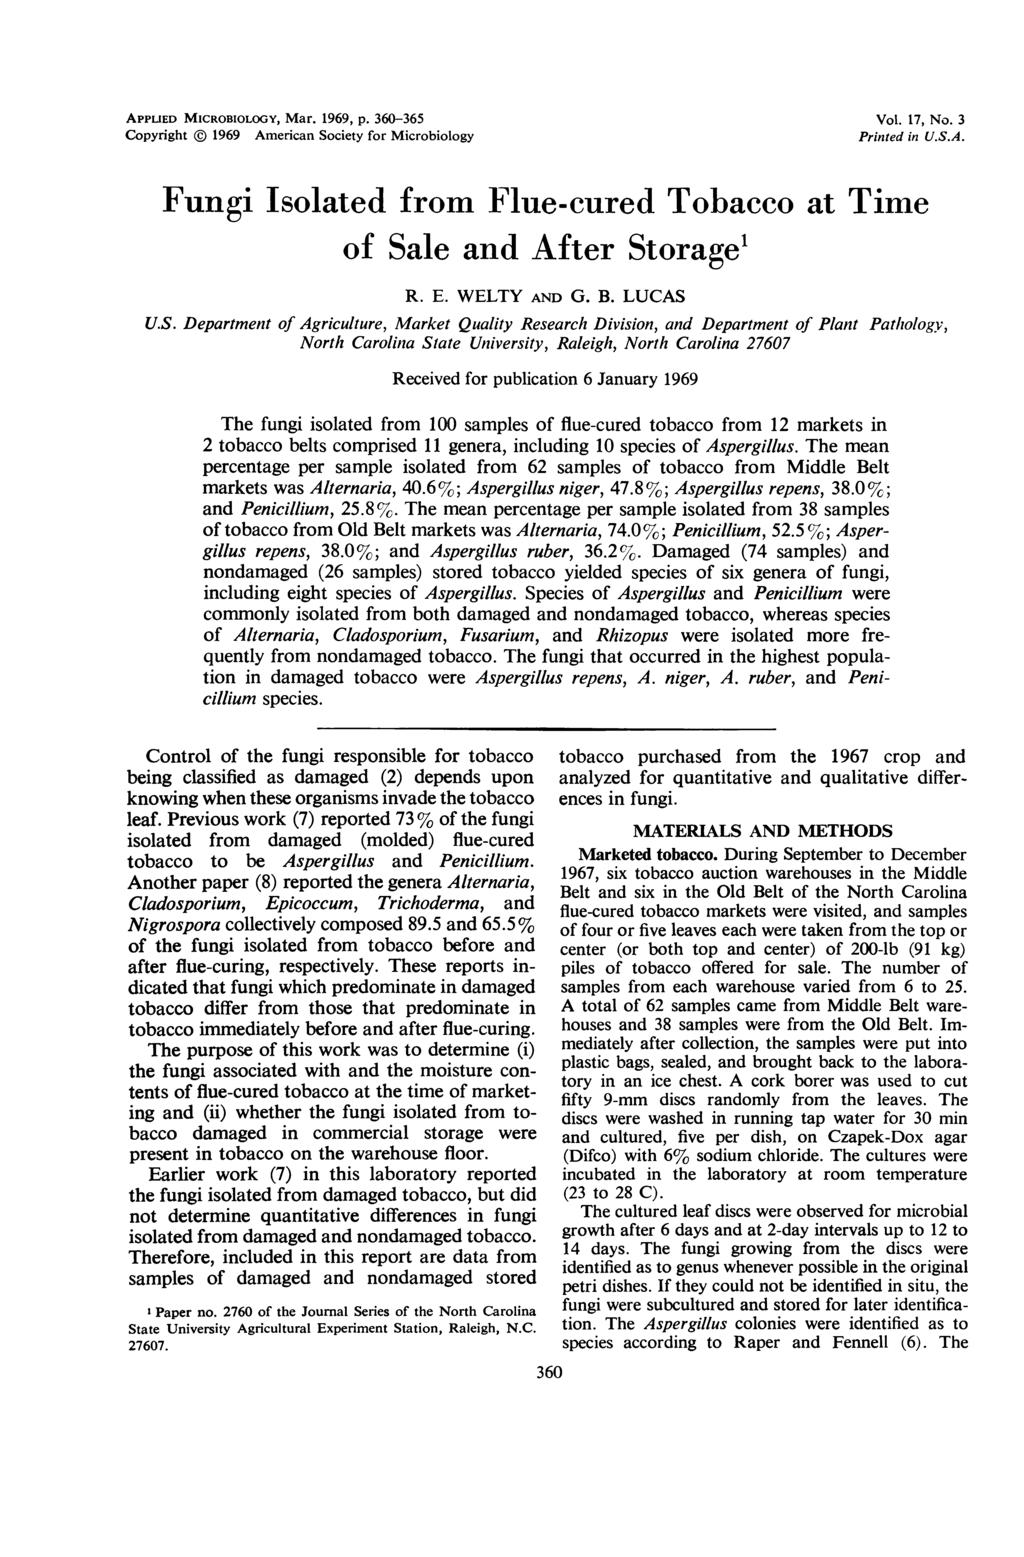 APPLIED MICROBIOLOGY, Mar. 1969, p. 360-365 Copyright 1969 American Society for Microbiology Vol. 17, No. 3 Printed in U.S.A. Fungi Isolated from Flue-cured Tobacco at Time of Sale and After Storage1 R.